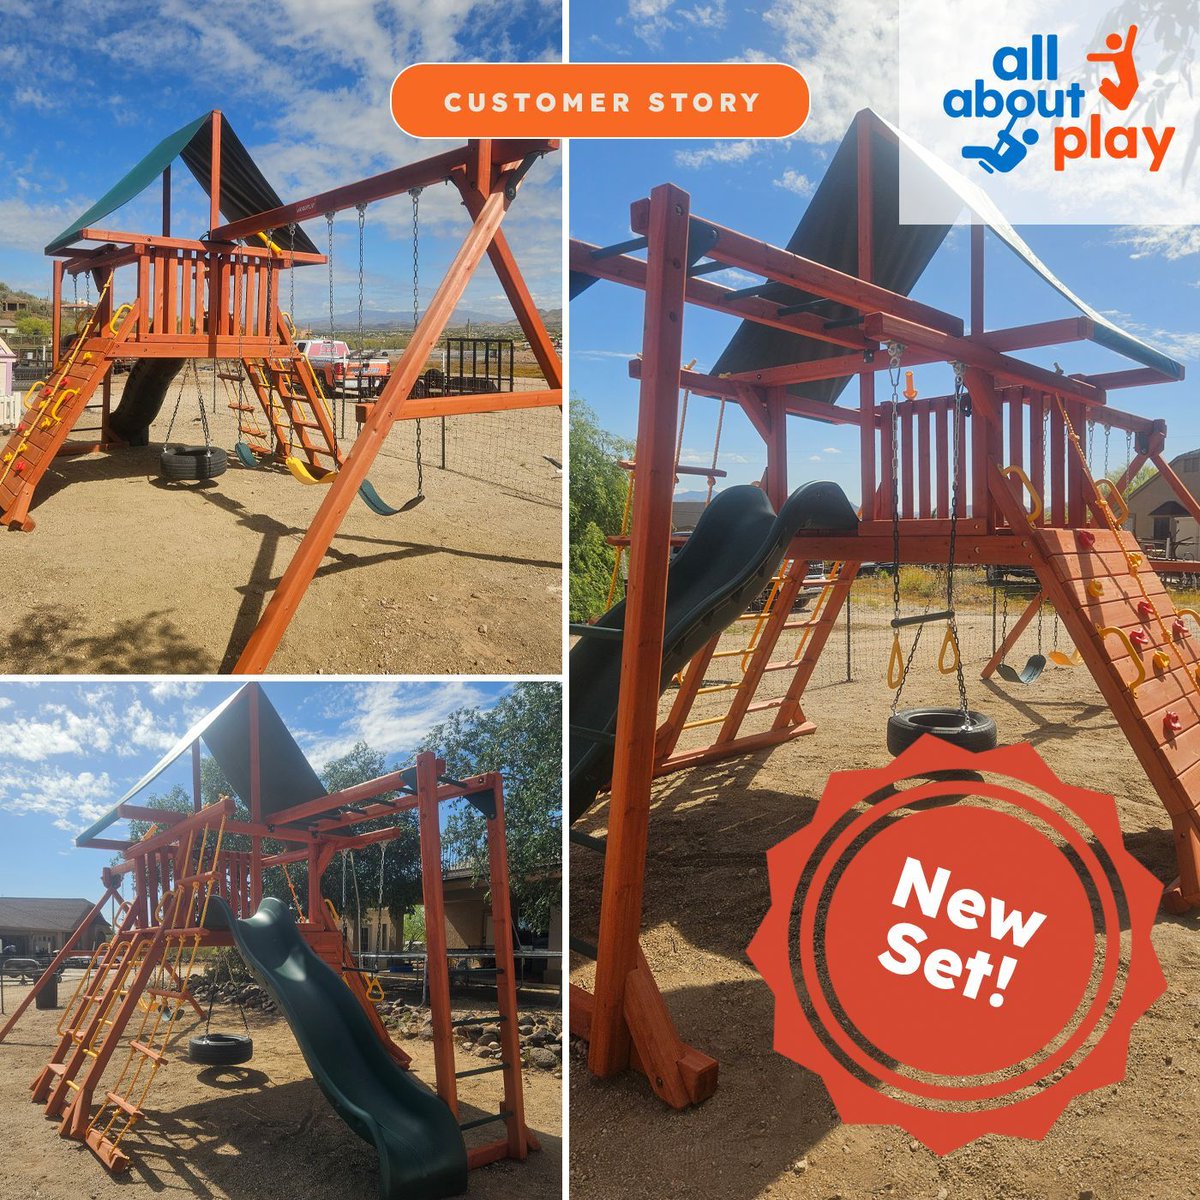 Exciting news! 🦁🐒 The Carver family just got their very own Lion's Den playset with Monkey Bars from All About Play! 🎉 Transform your backyard into a hub of adventure with our wide selection of playsets, trampolines, and more! Visit us today! #AllAboutPlay #BackyardFun 🌟